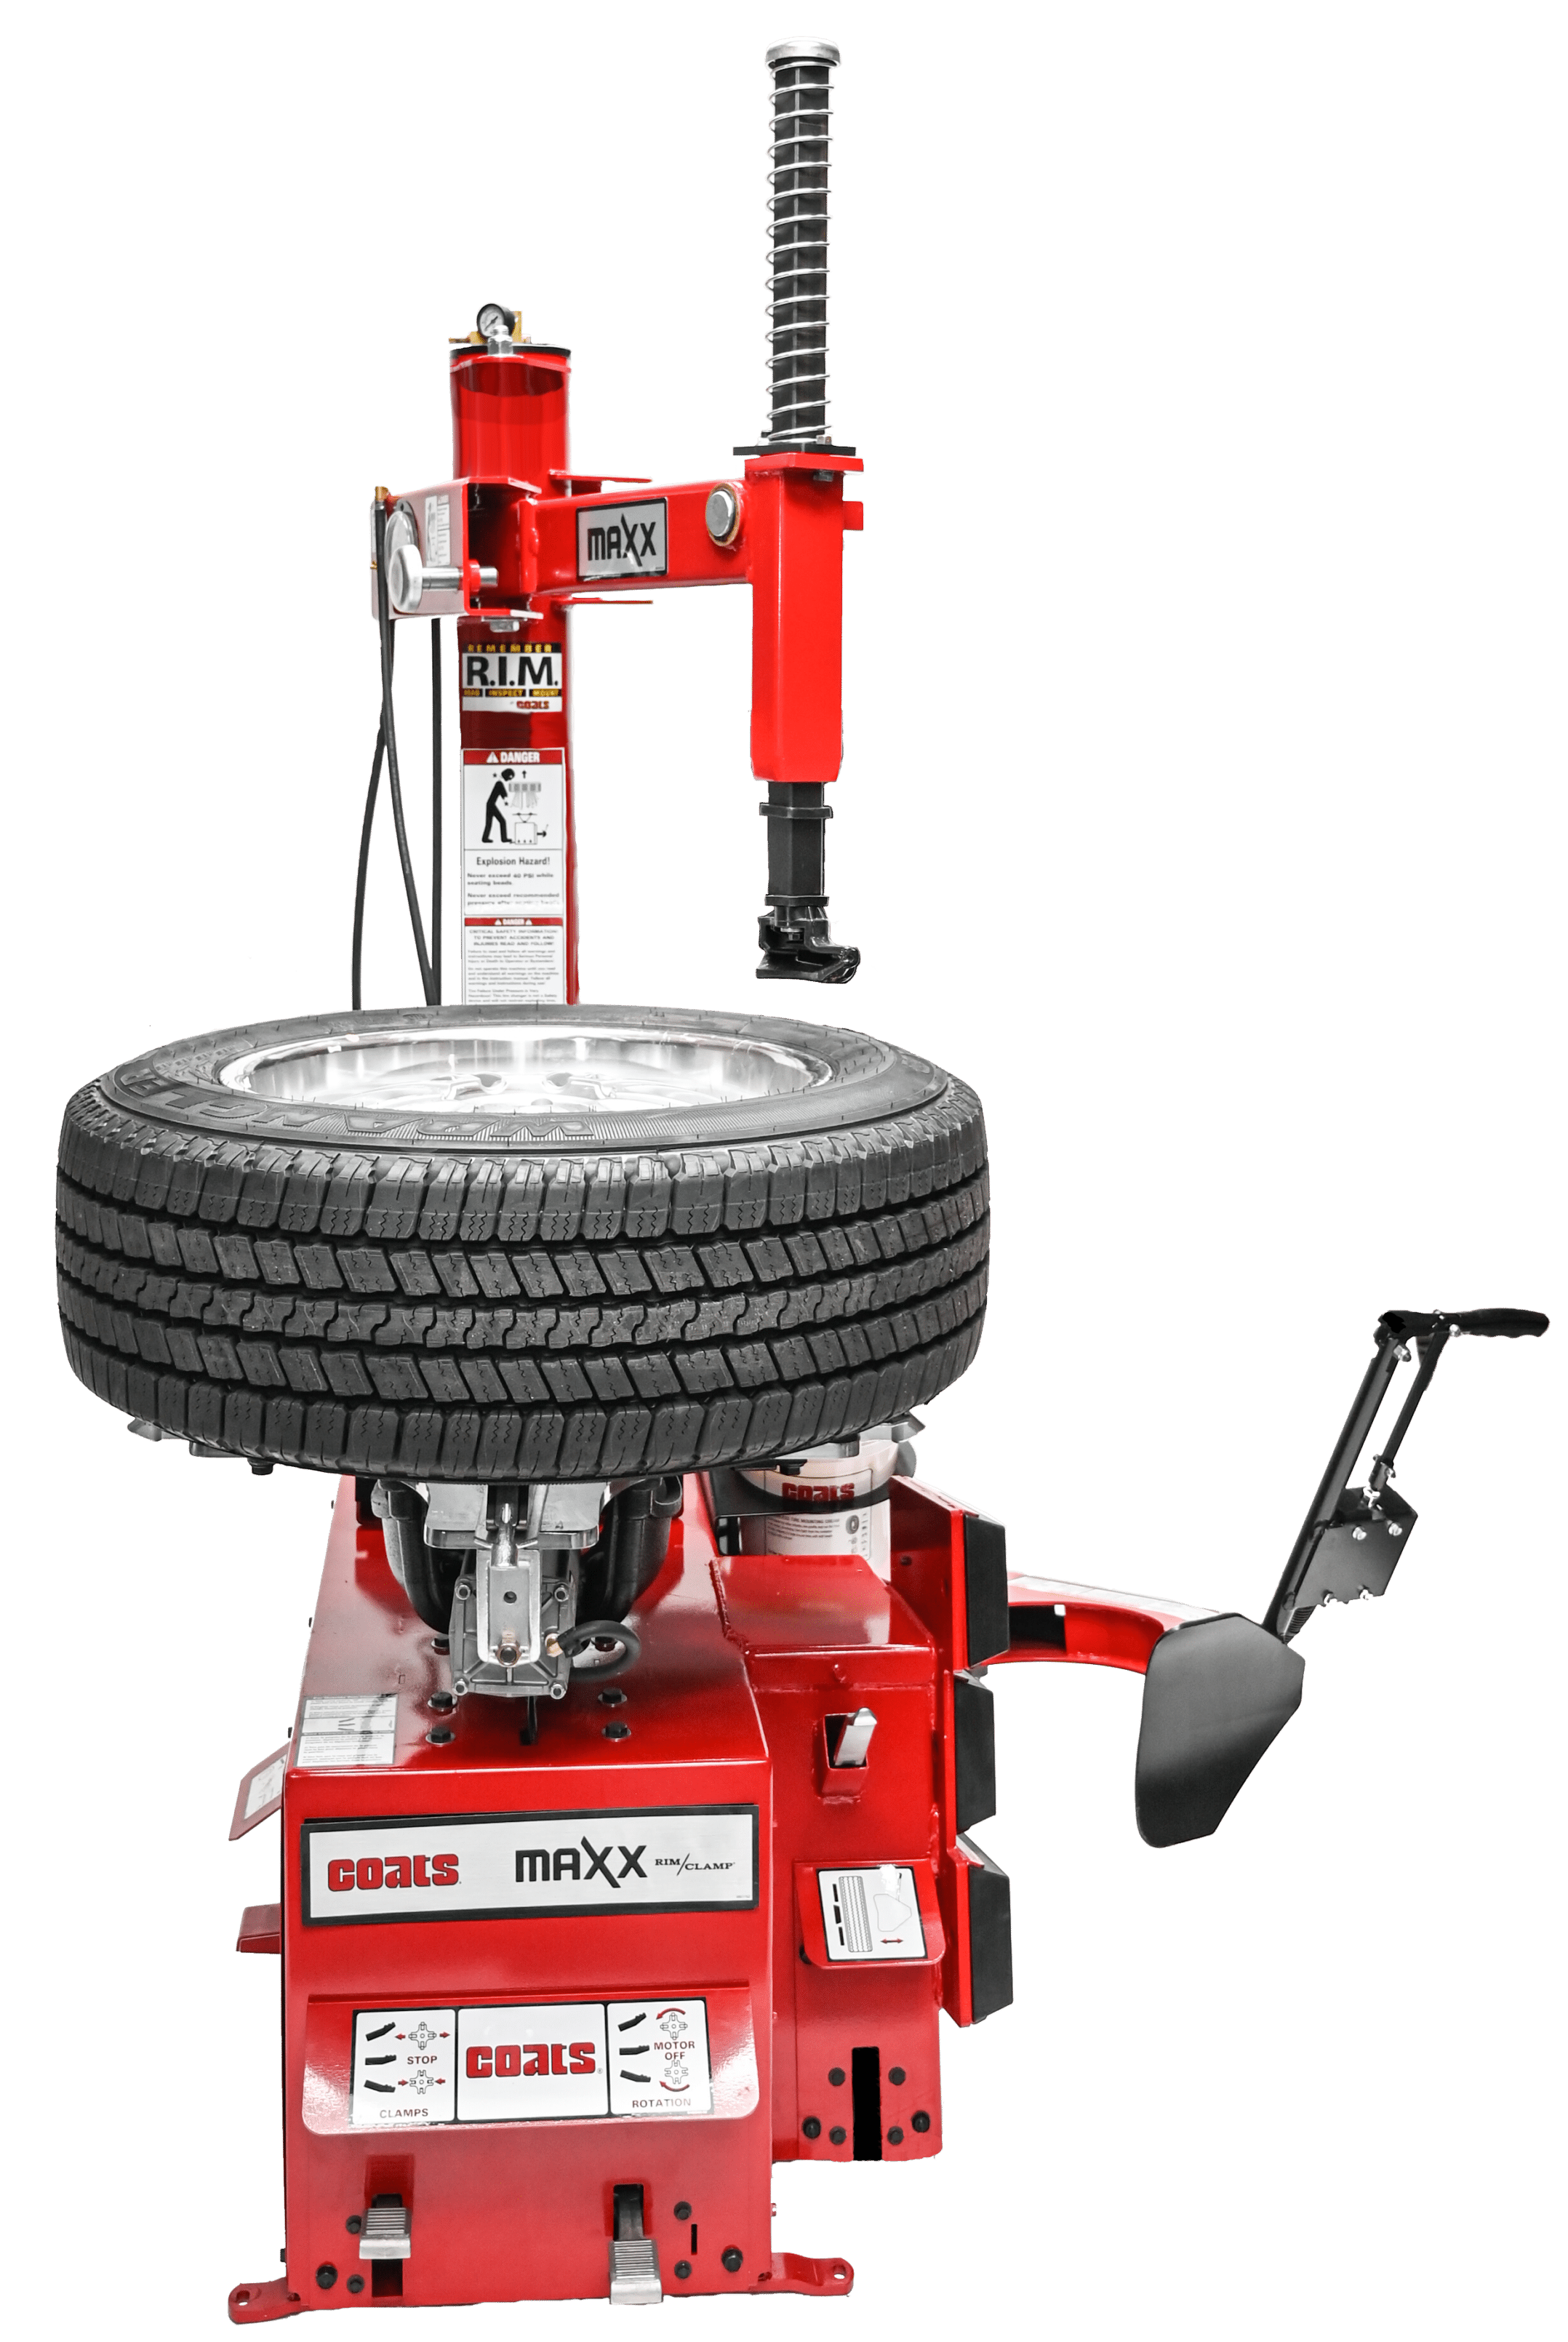 A red colored Coats Maxx 50 tire changer with a wheel mounted on the tabletop